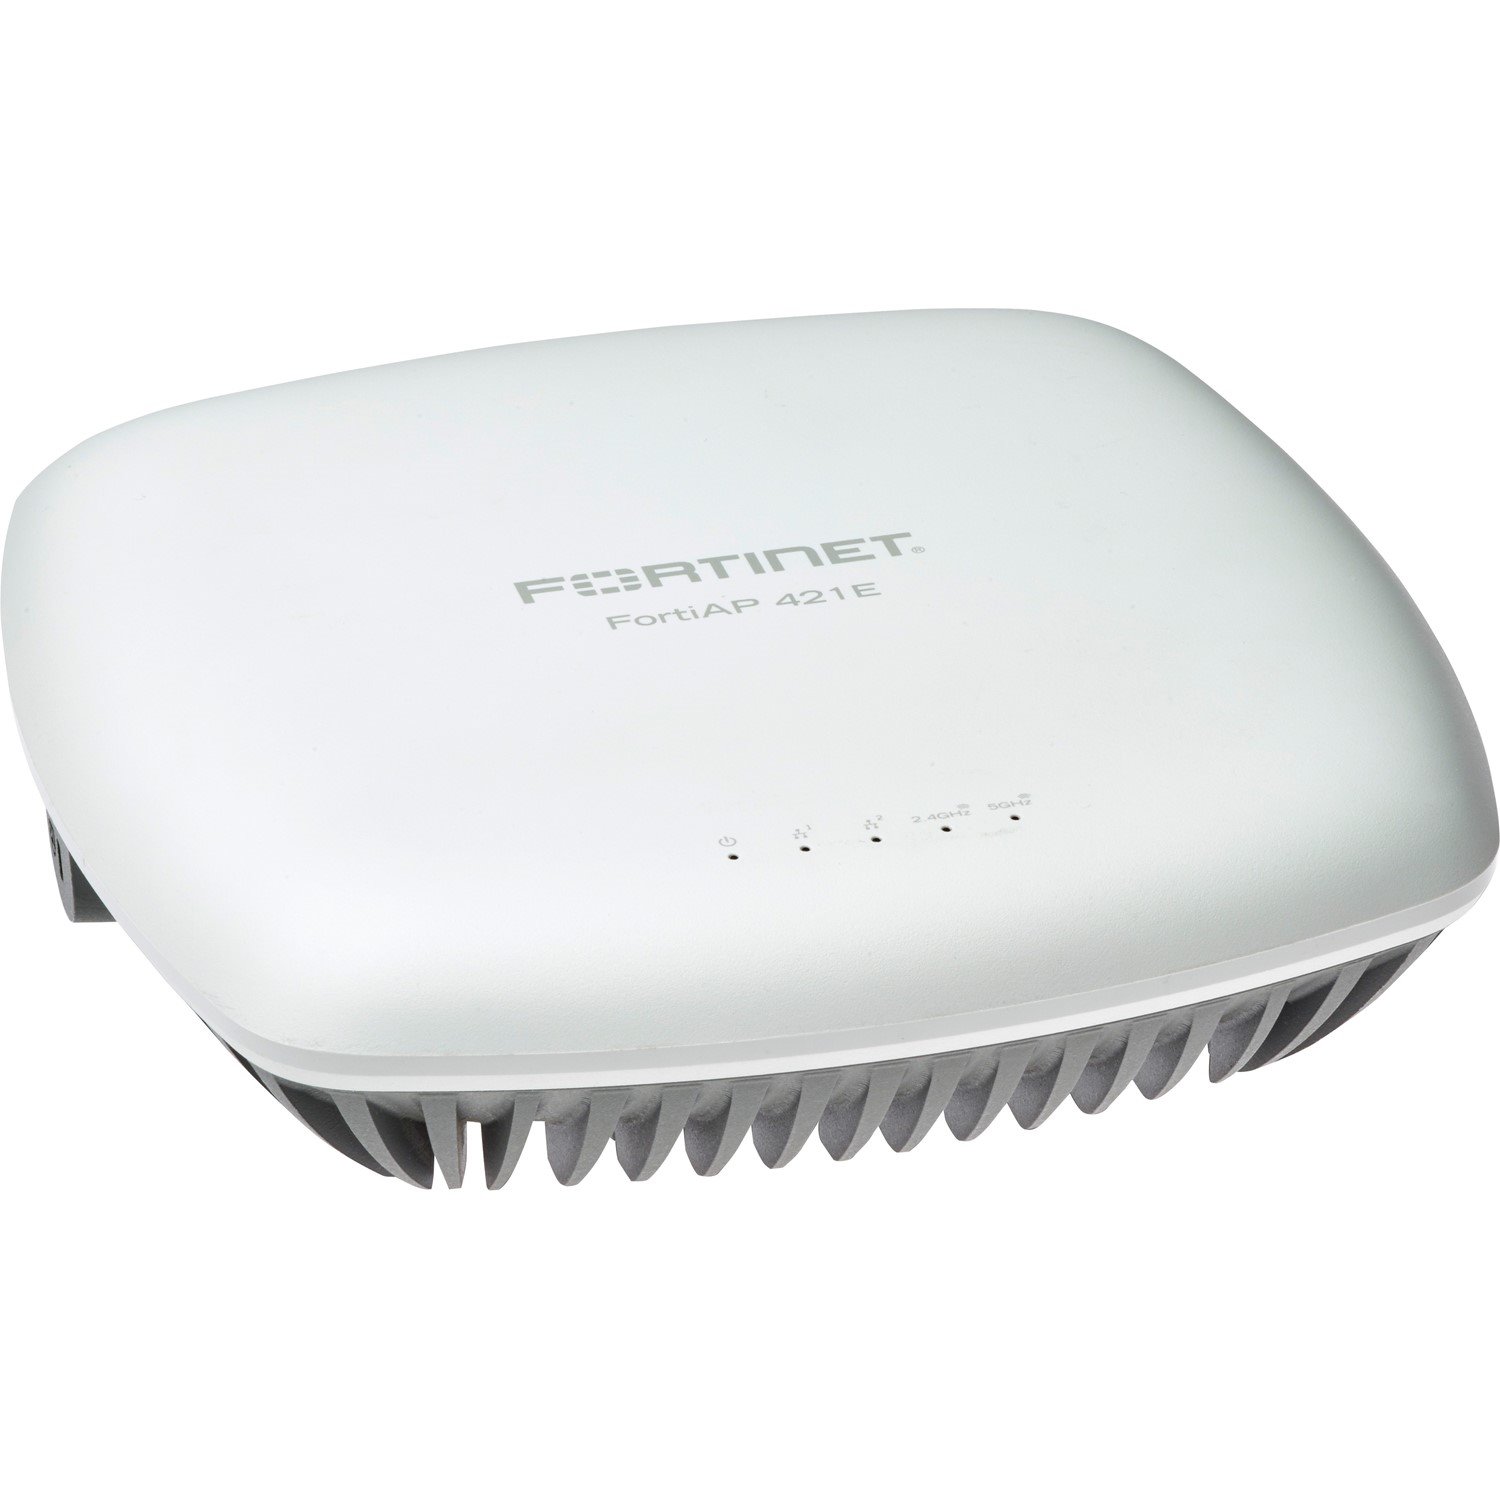 Fortinet wlan access point tightvnc installation guide